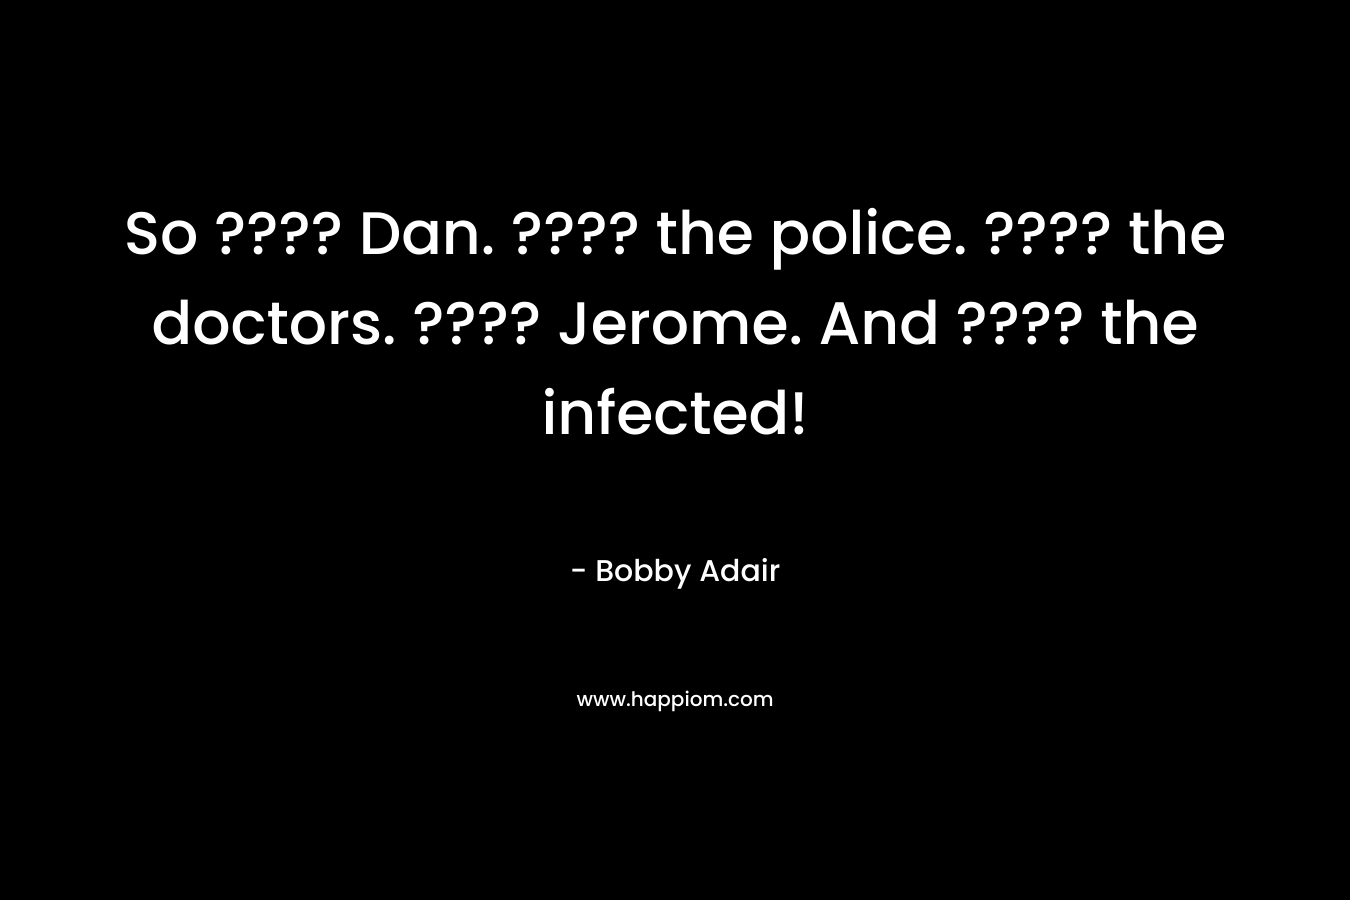 So ???? Dan. ???? the police. ???? the doctors. ???? Jerome. And ???? the infected! – Bobby Adair